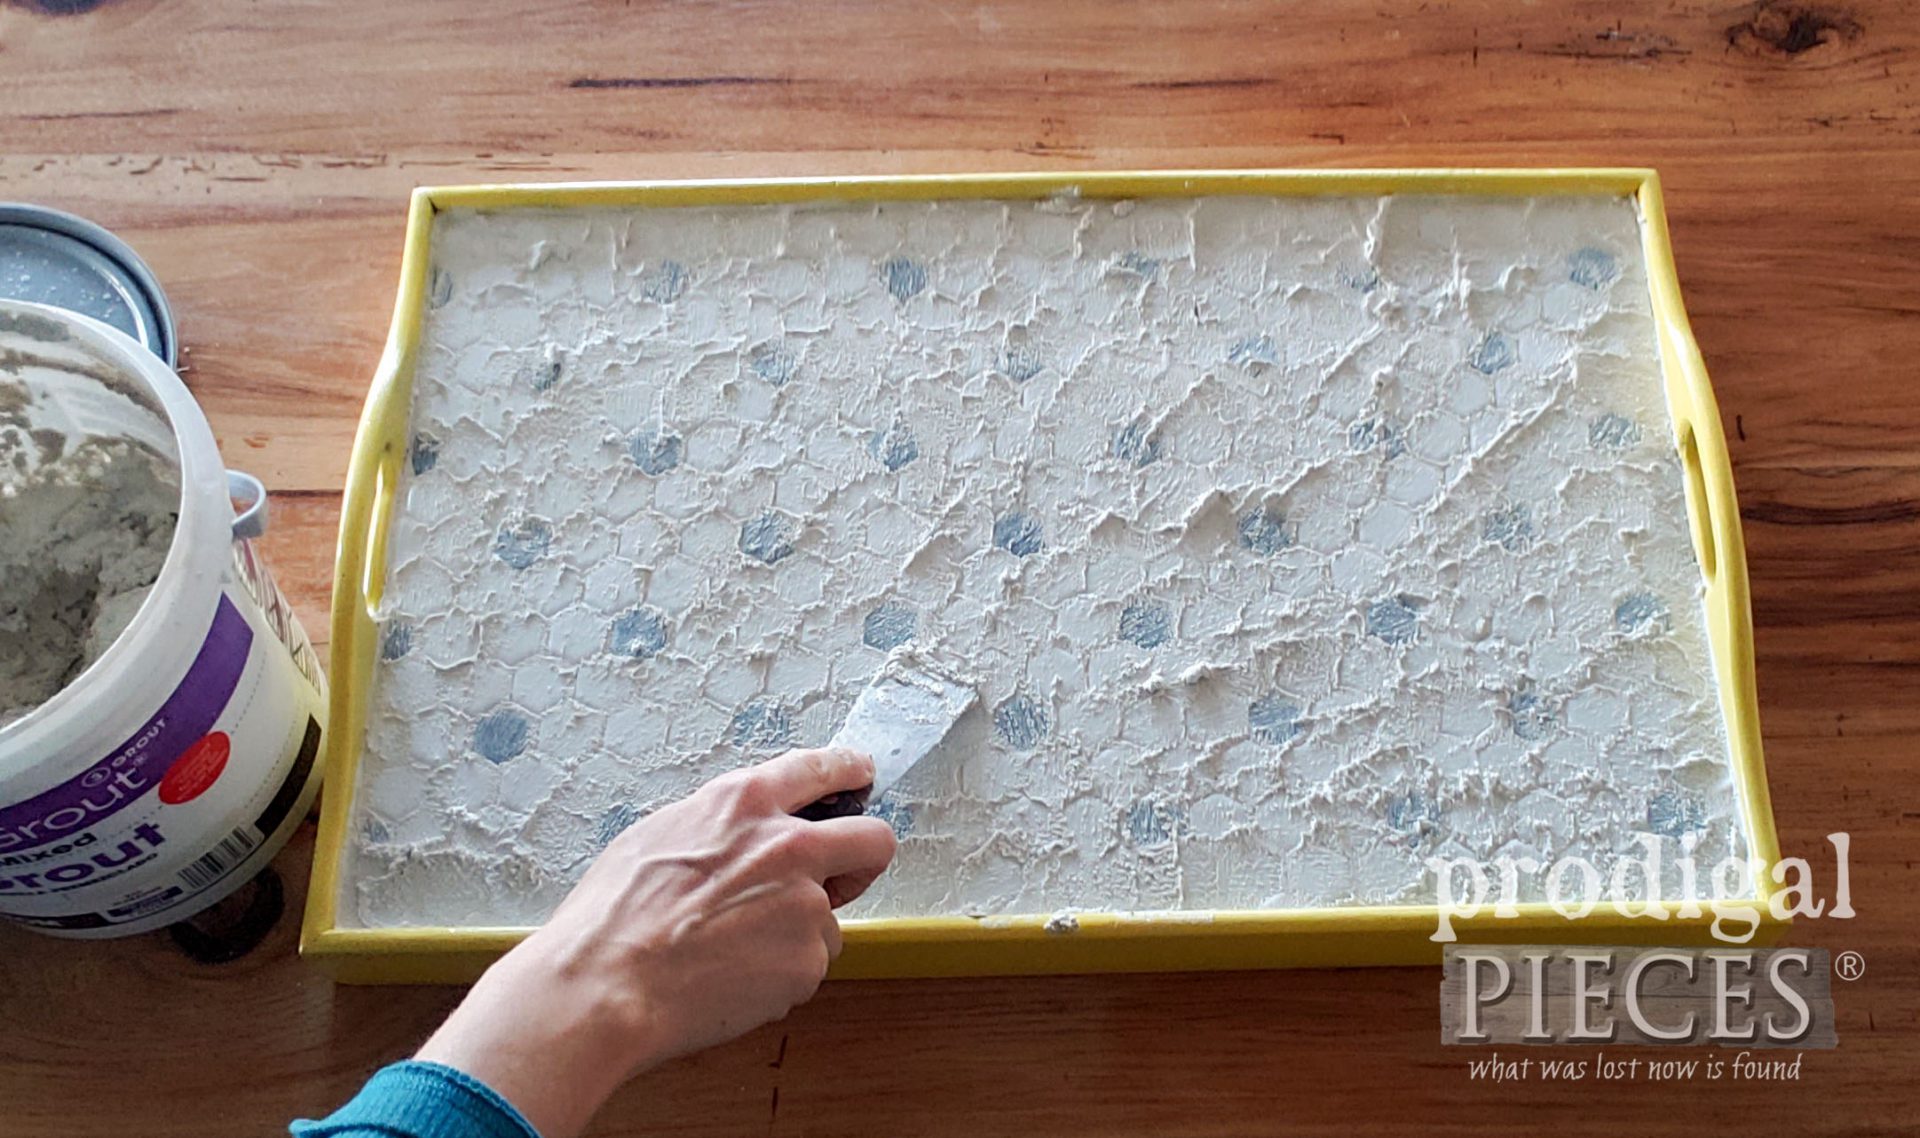 Applying Grout to DIY Tiled Tray by Larissa of Prodigal Pieces | prodiaglpieces.com #prodigalpieces #diy #entertaining #home #homedecor